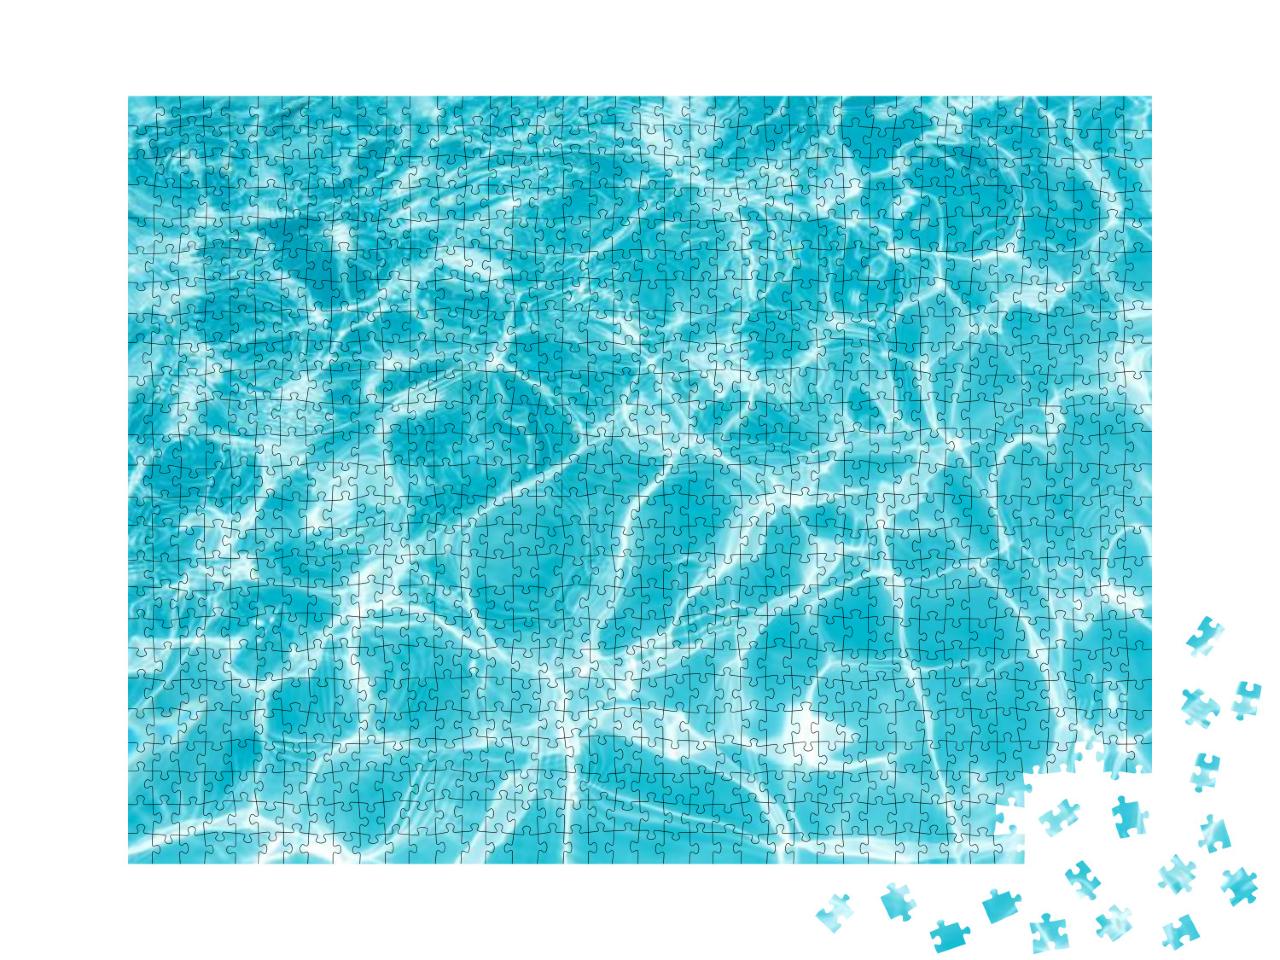 Ripple Water in Swimming Pool with Sun Reflection... Jigsaw Puzzle with 1000 pieces